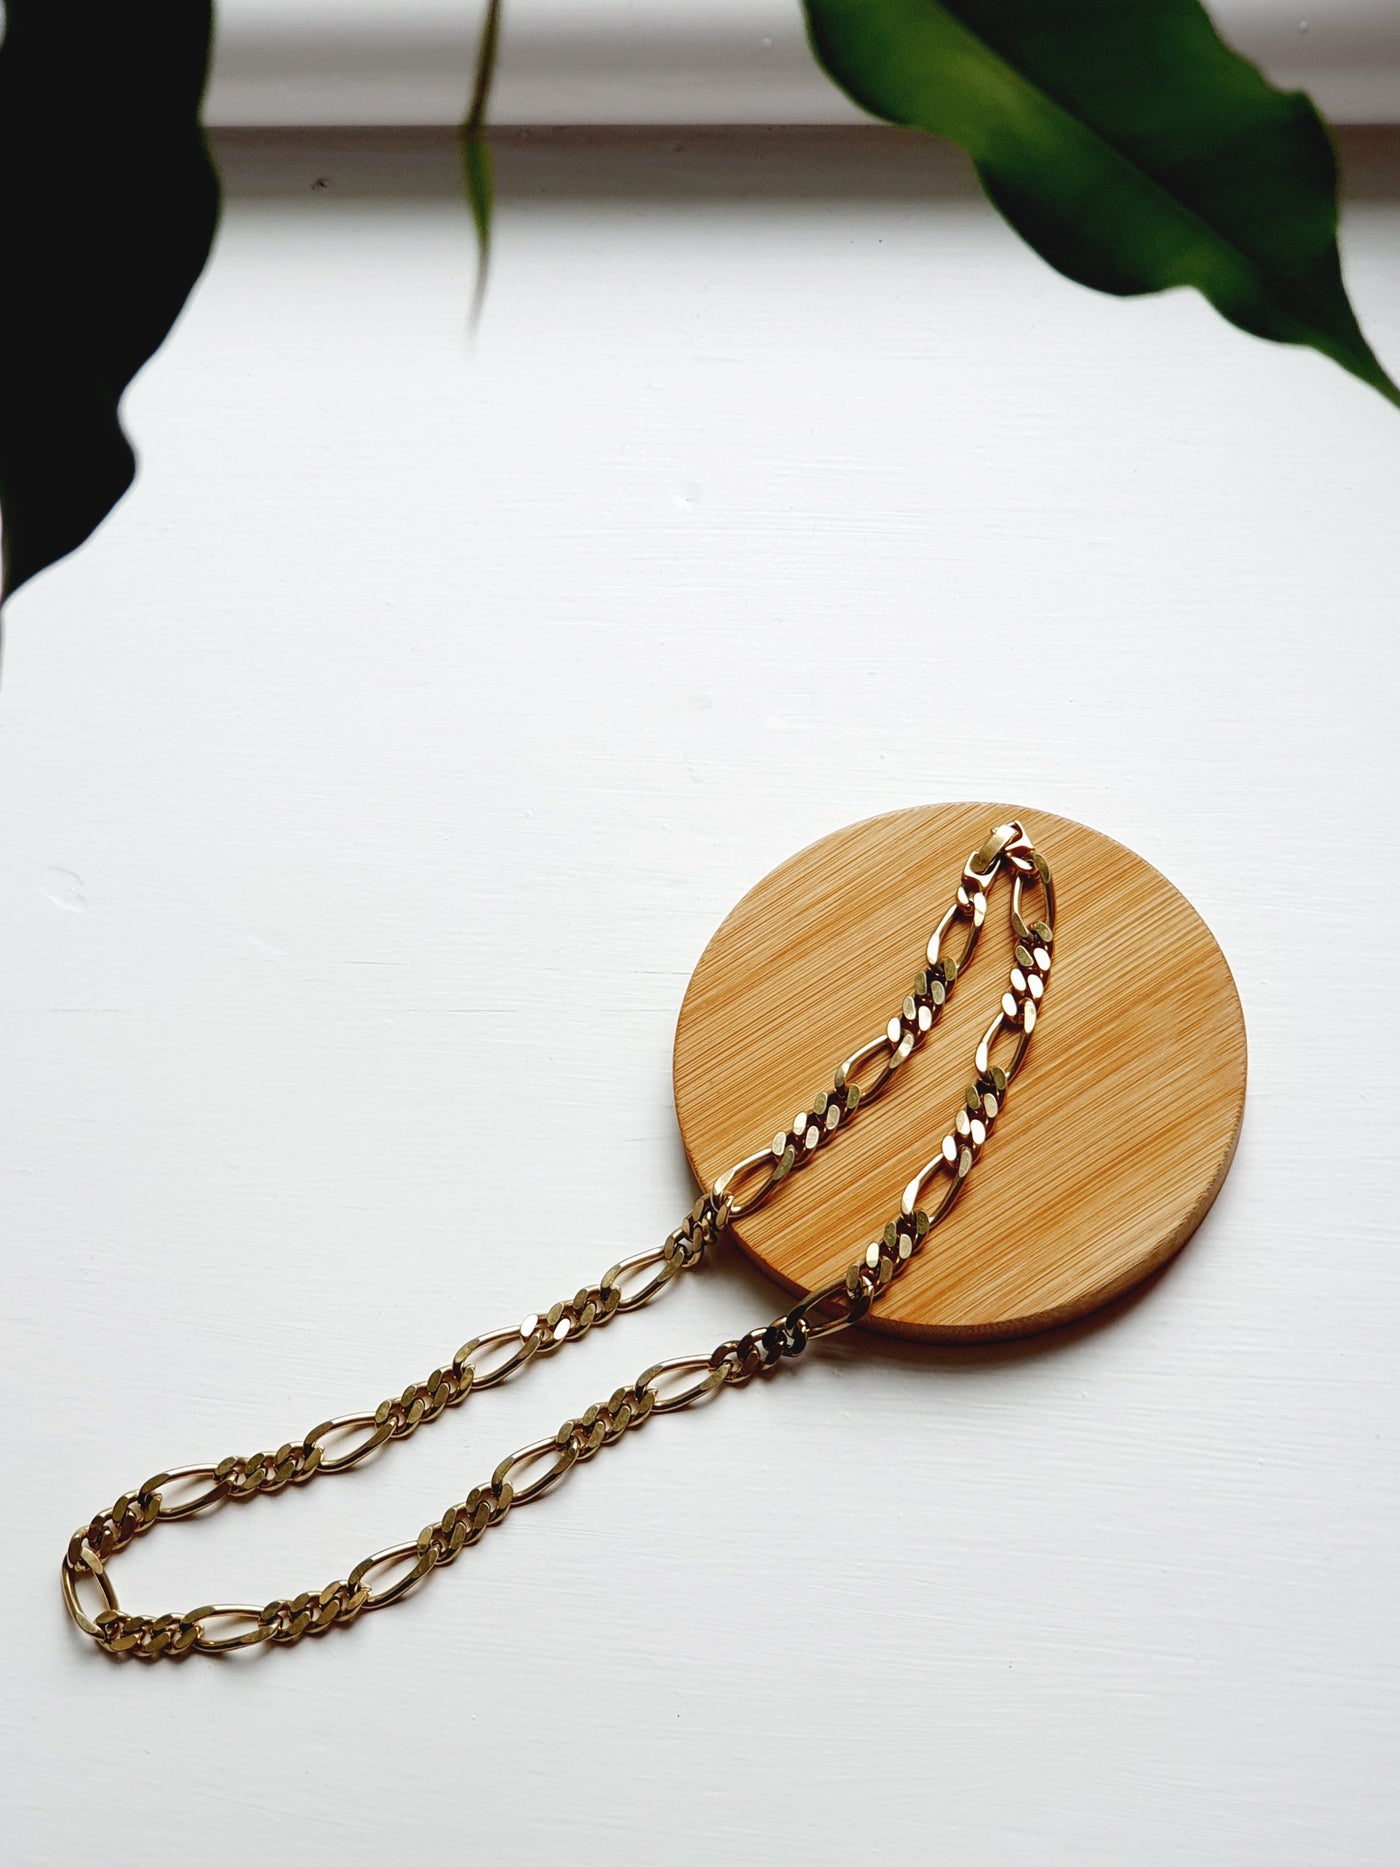 Vintage Gold Toned Flat Linked Chain